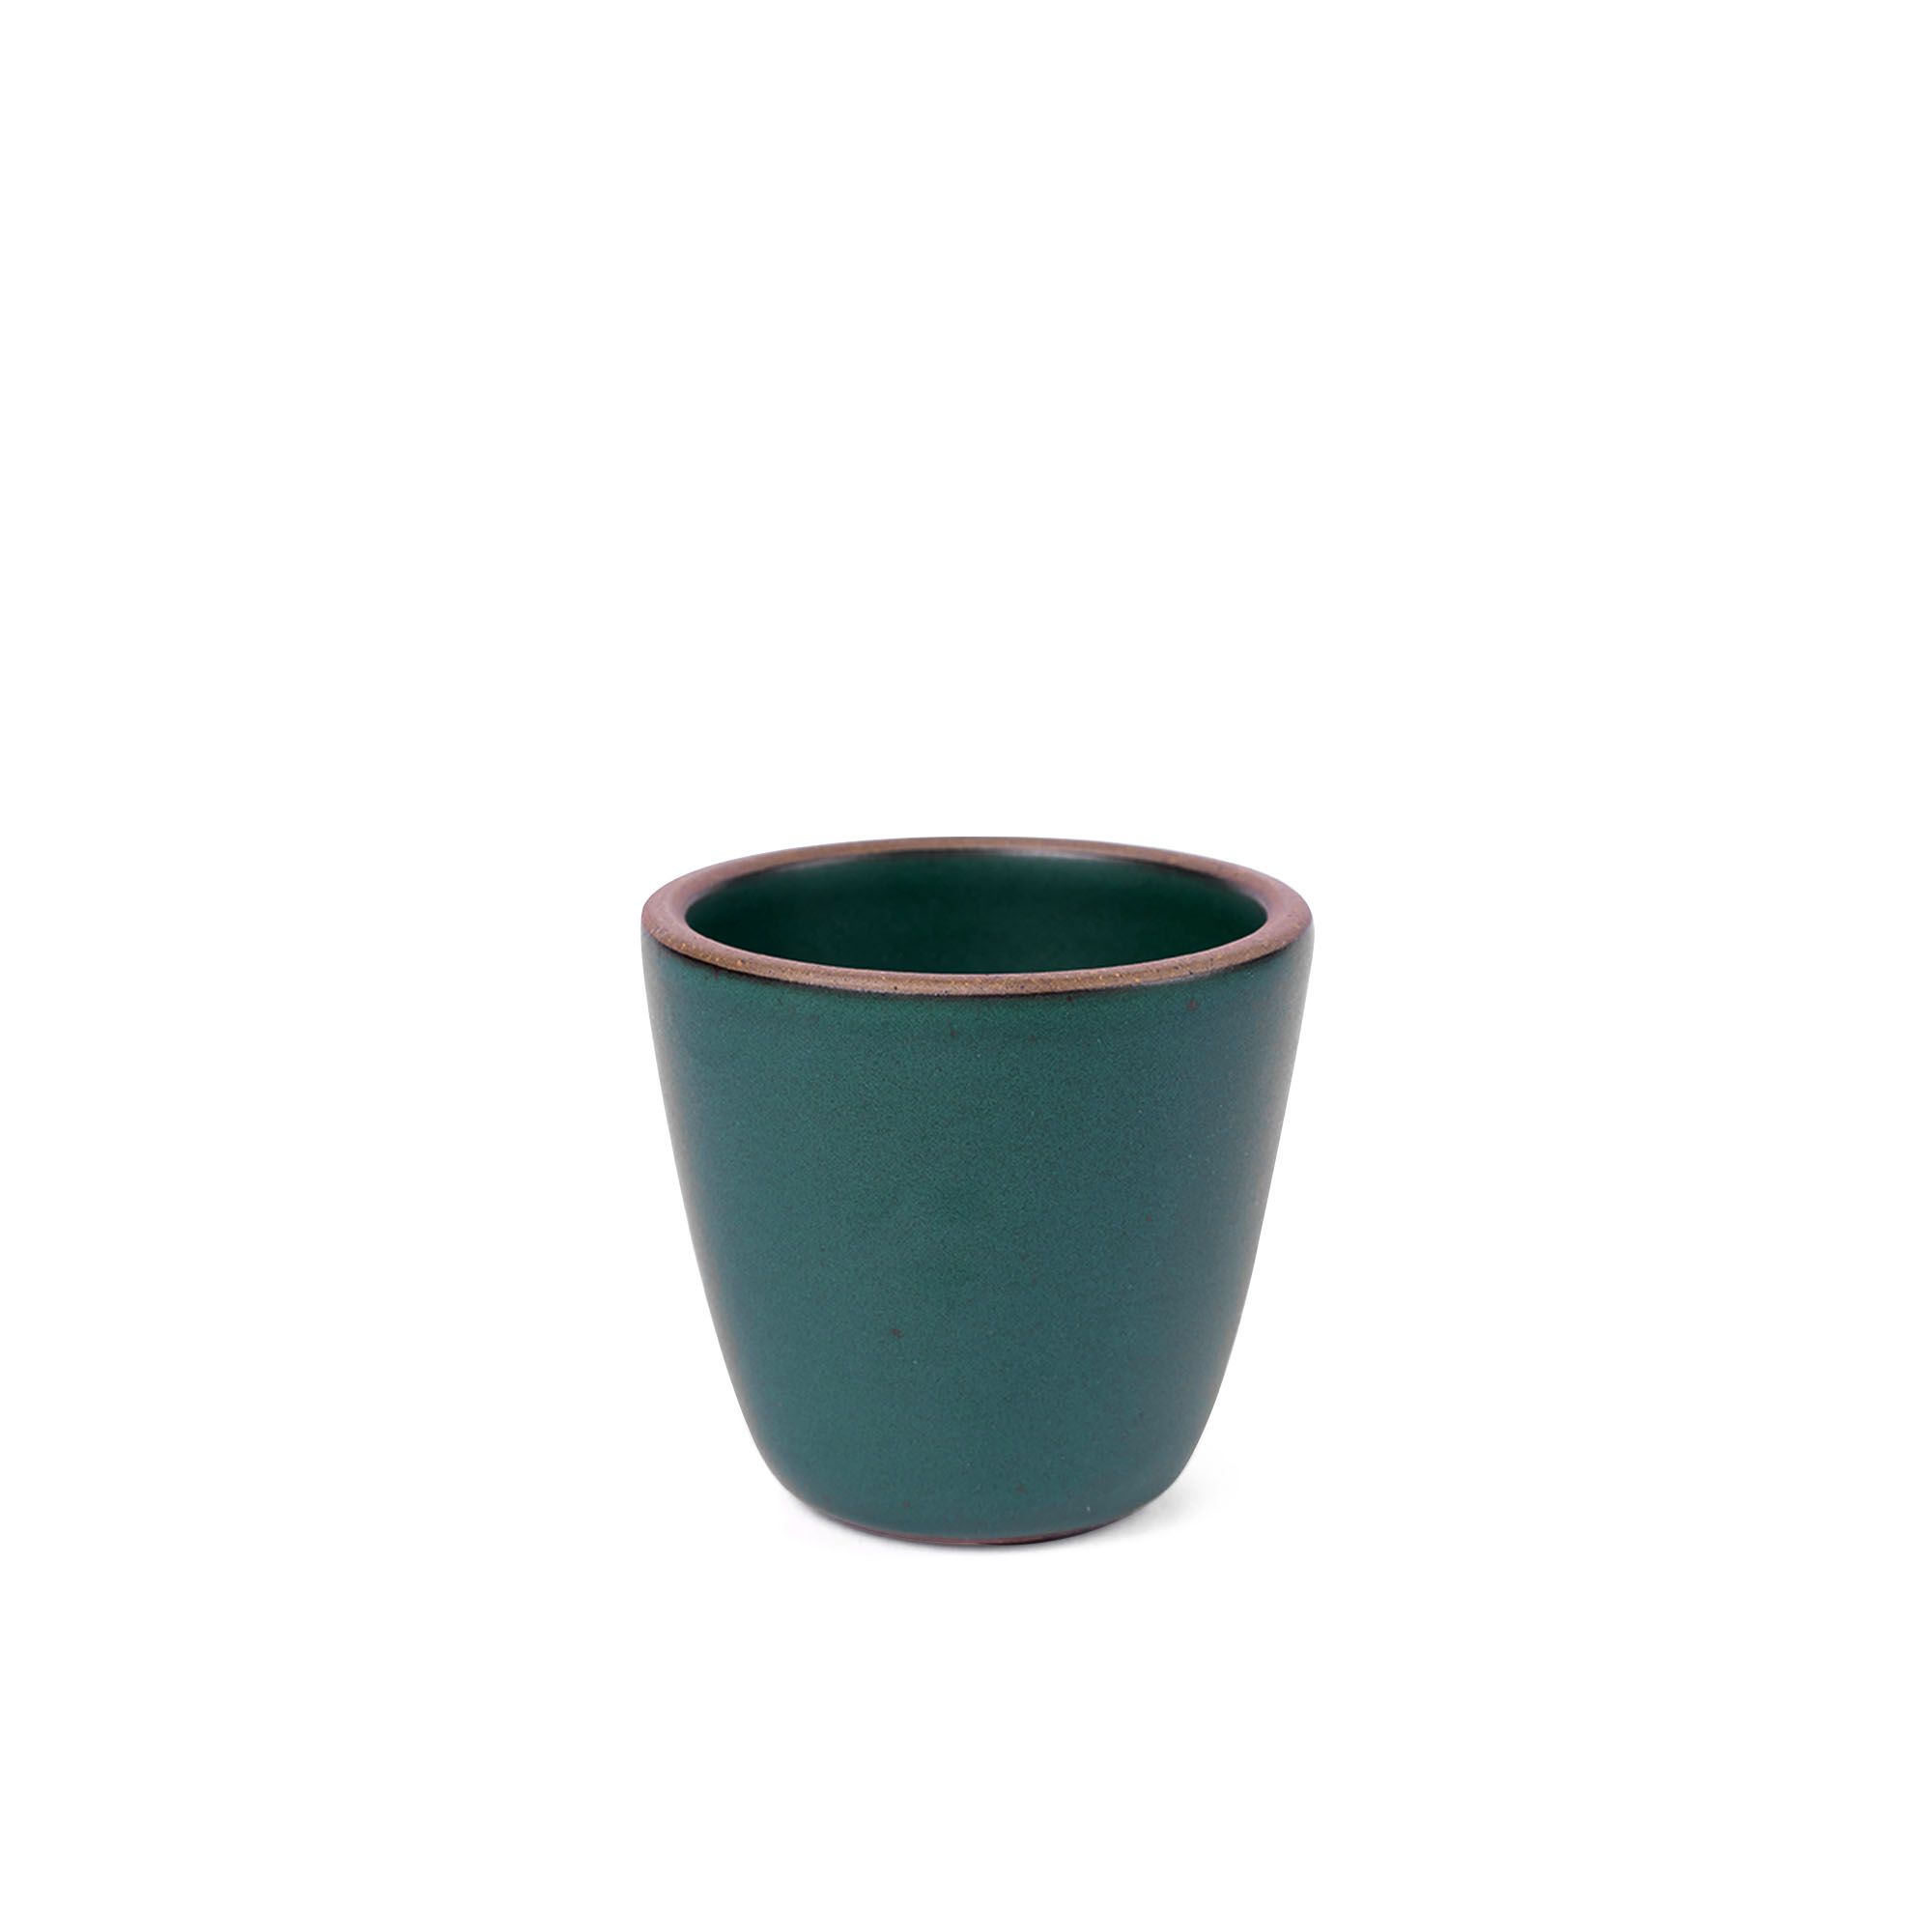 A short cup that tapers out to get wider at the top in a deep dark teal color featuring iron speckles